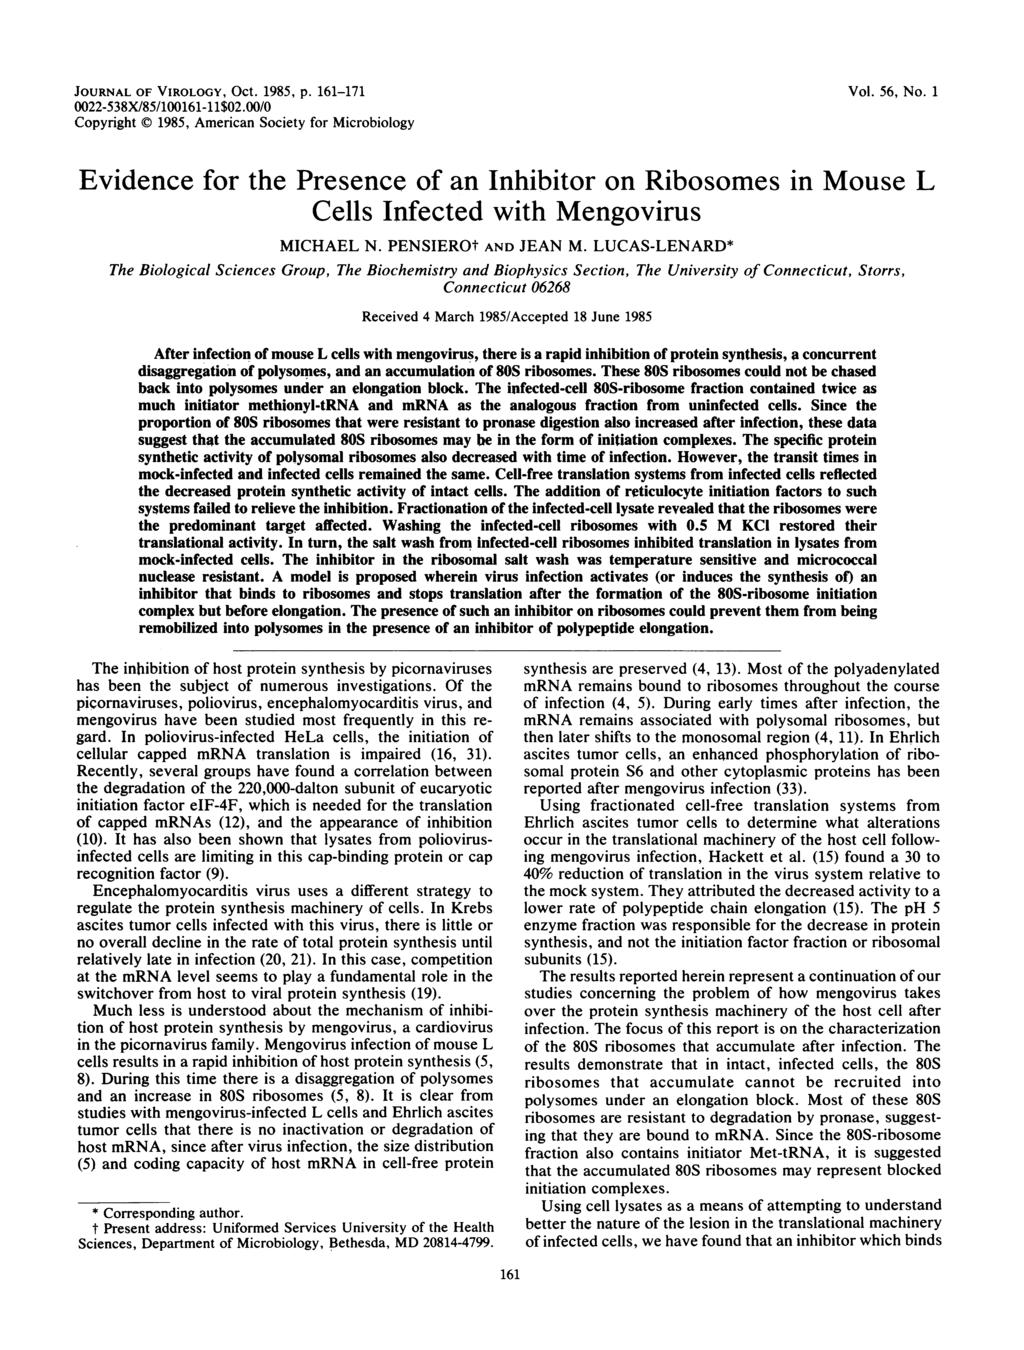 JOURNAL OF VIROLOGY, OCt. 1985, p. 161-171 22-538X/85/1161-11$2./ Copyright 1985, American Society for Microbiology Vol. 56, No.